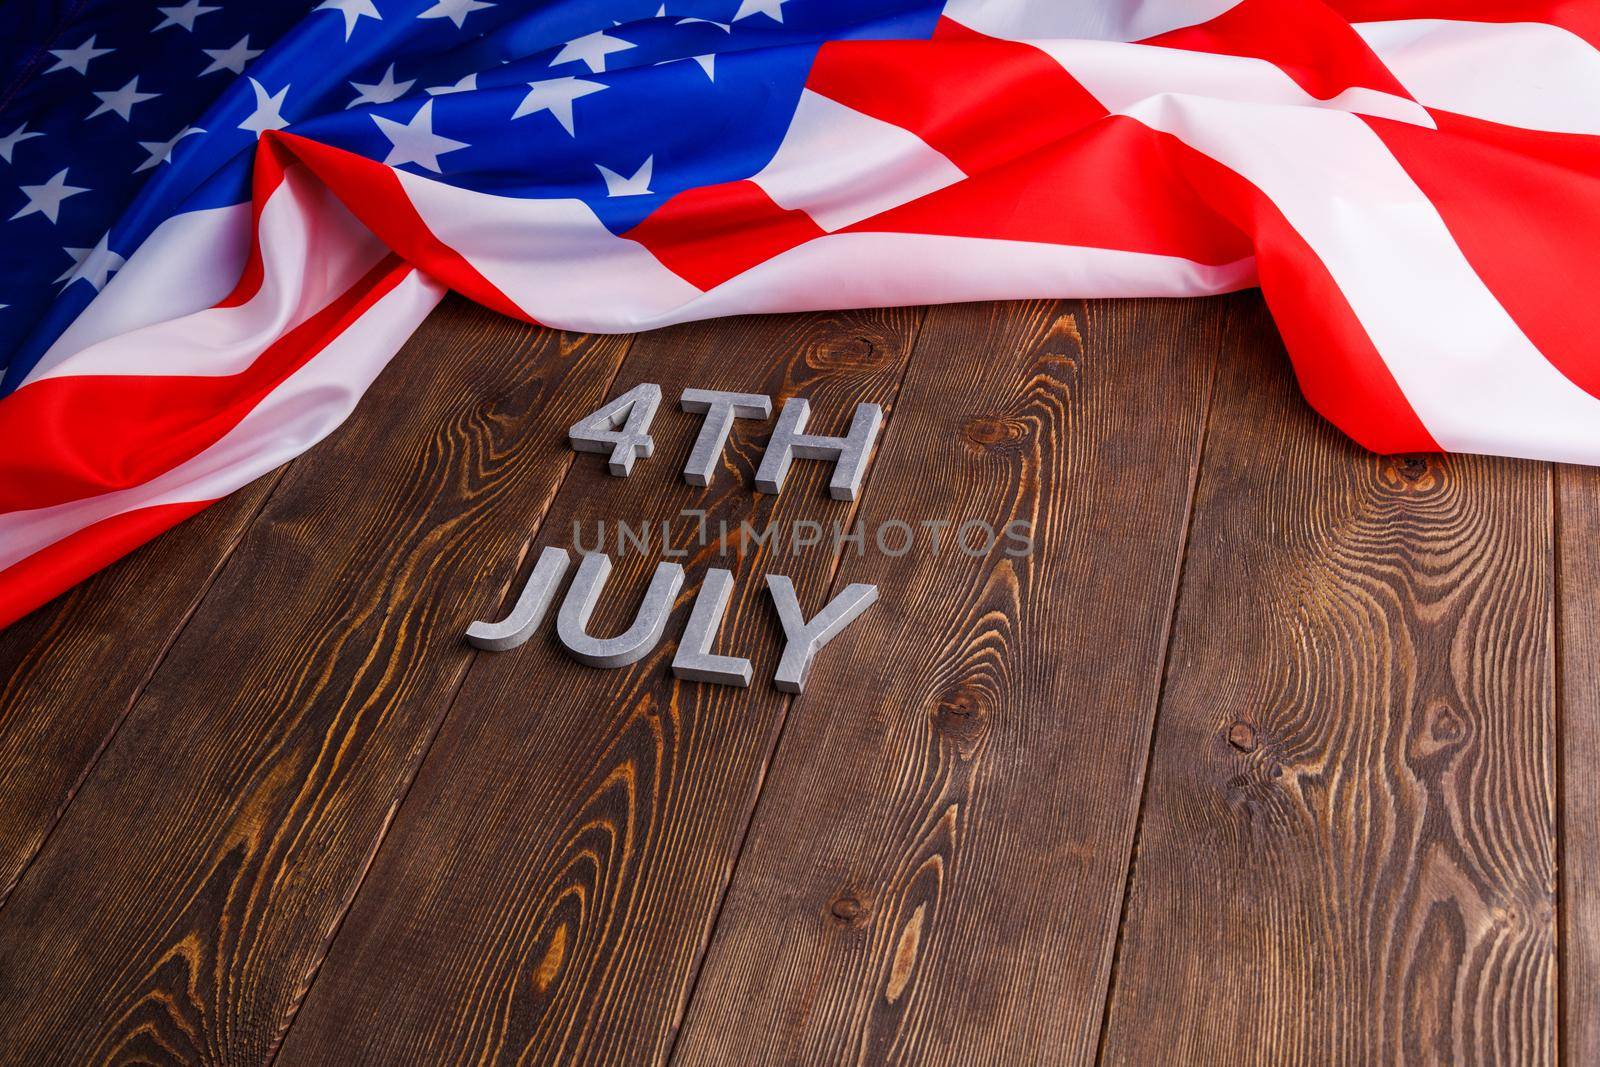 the words 4th july and crumpled usa flag on flat textured wooden surface background.